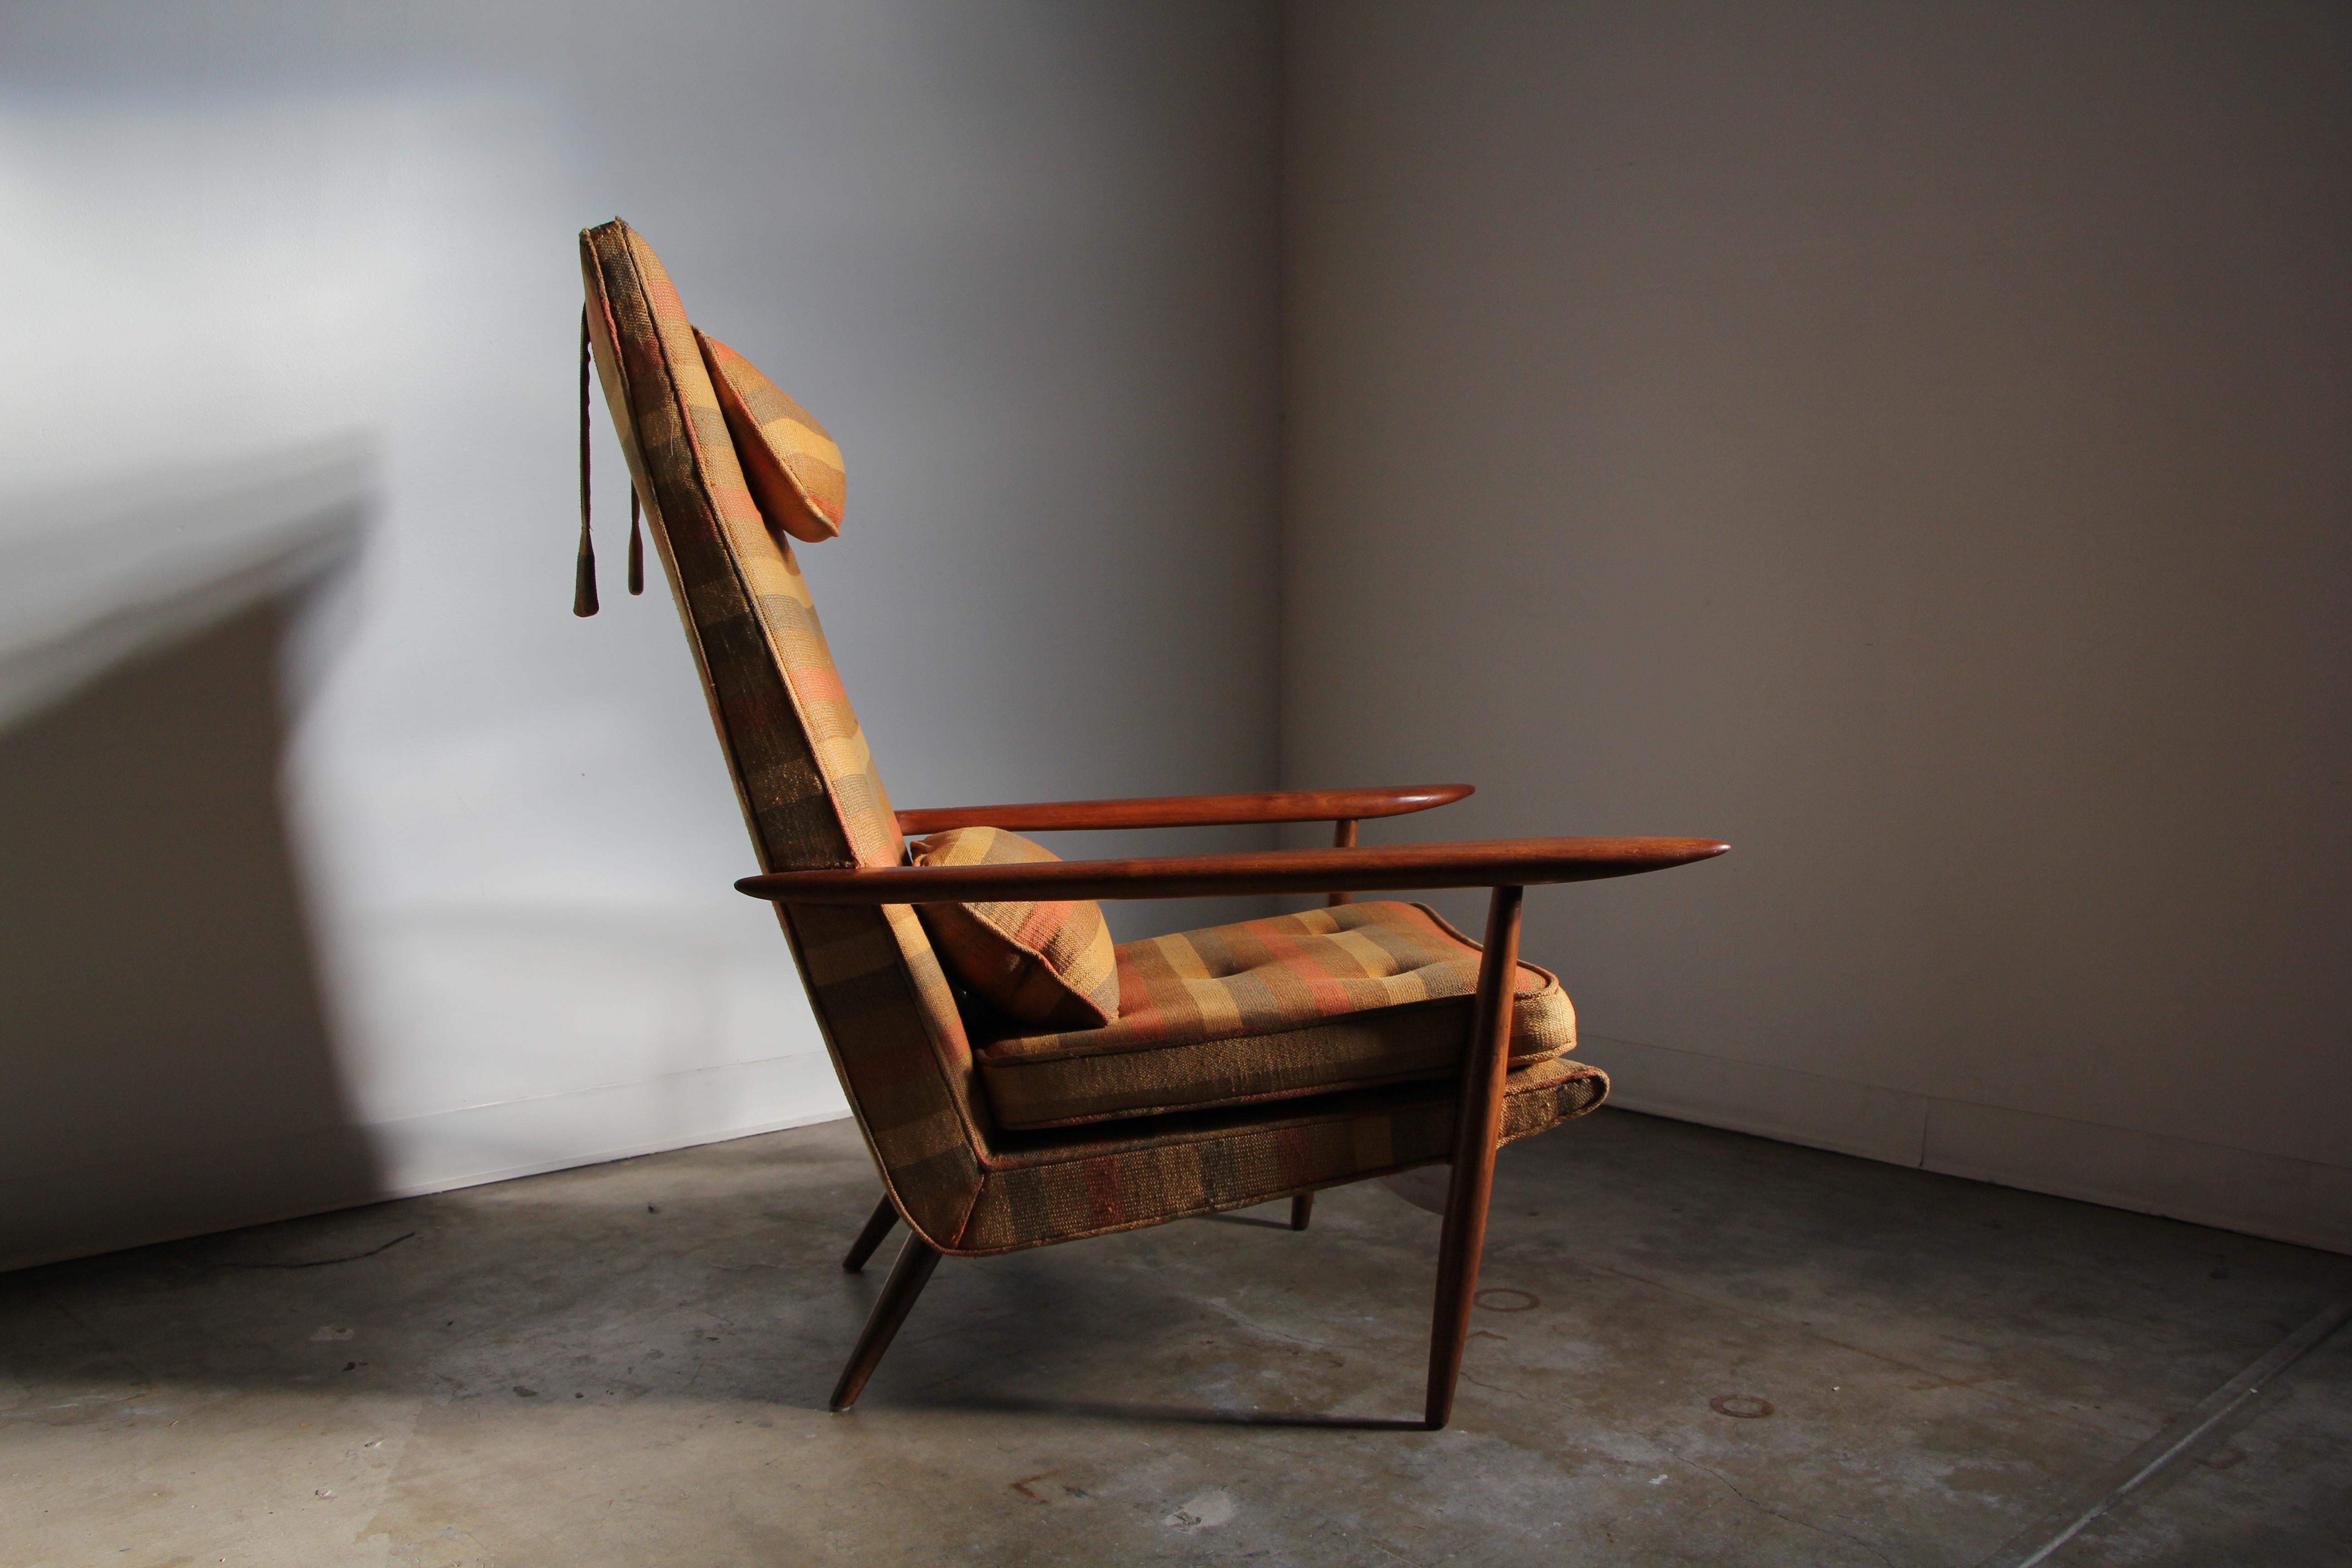 A large, impressive, and exceedingly rare lounge chair designed by George Nakashima for Widdicomb circa 1959. Only a couple of these chairs have hit the market in the last decade, and this may very well be the nicest one. It is in absolutely